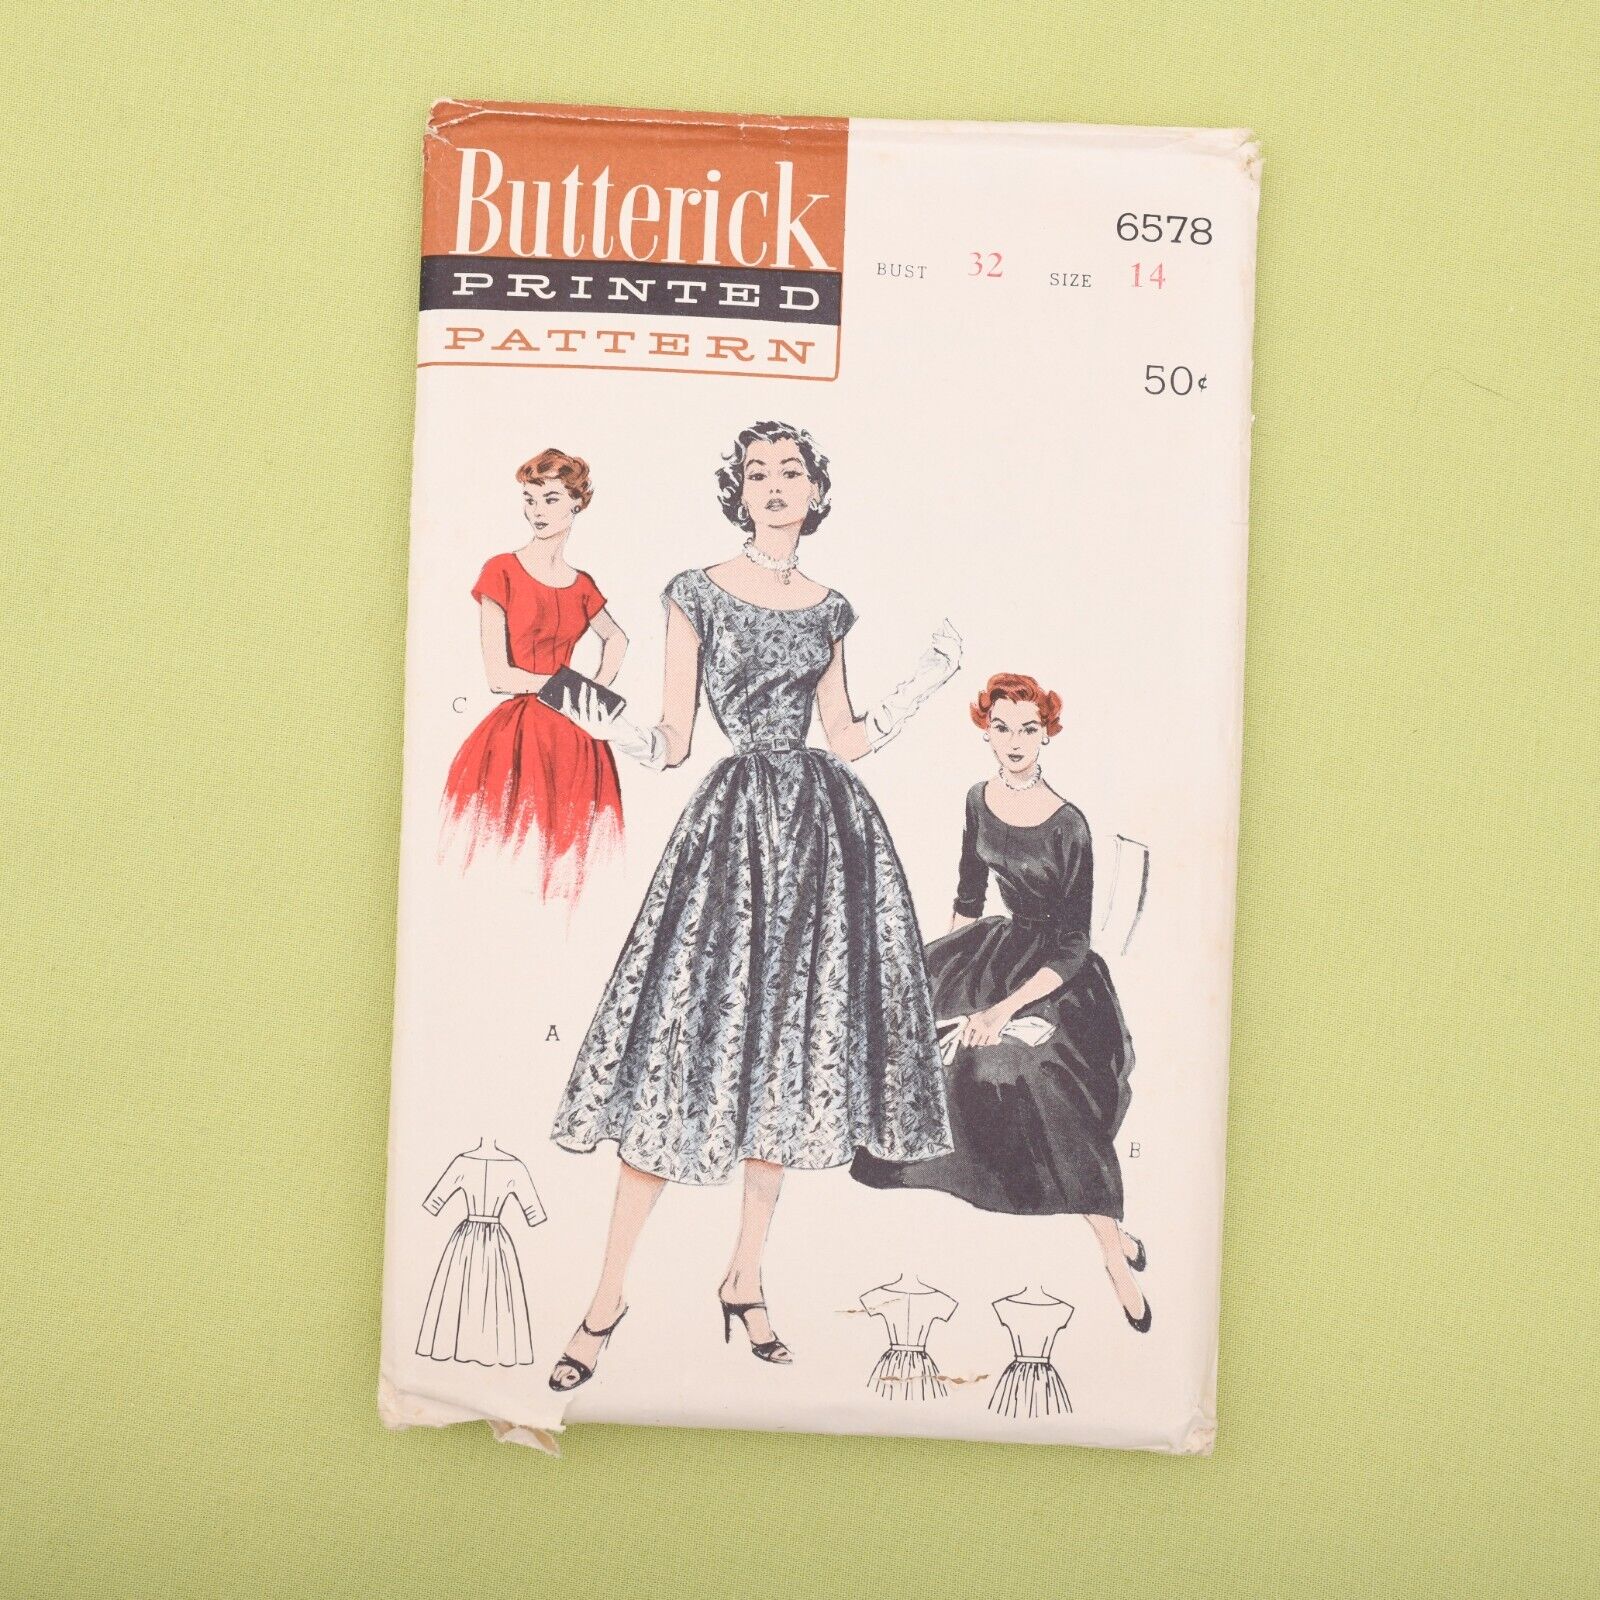 Vintage 1950s Butterick Dress Sewing Pattern - 6578 - Bust 32 - Complete